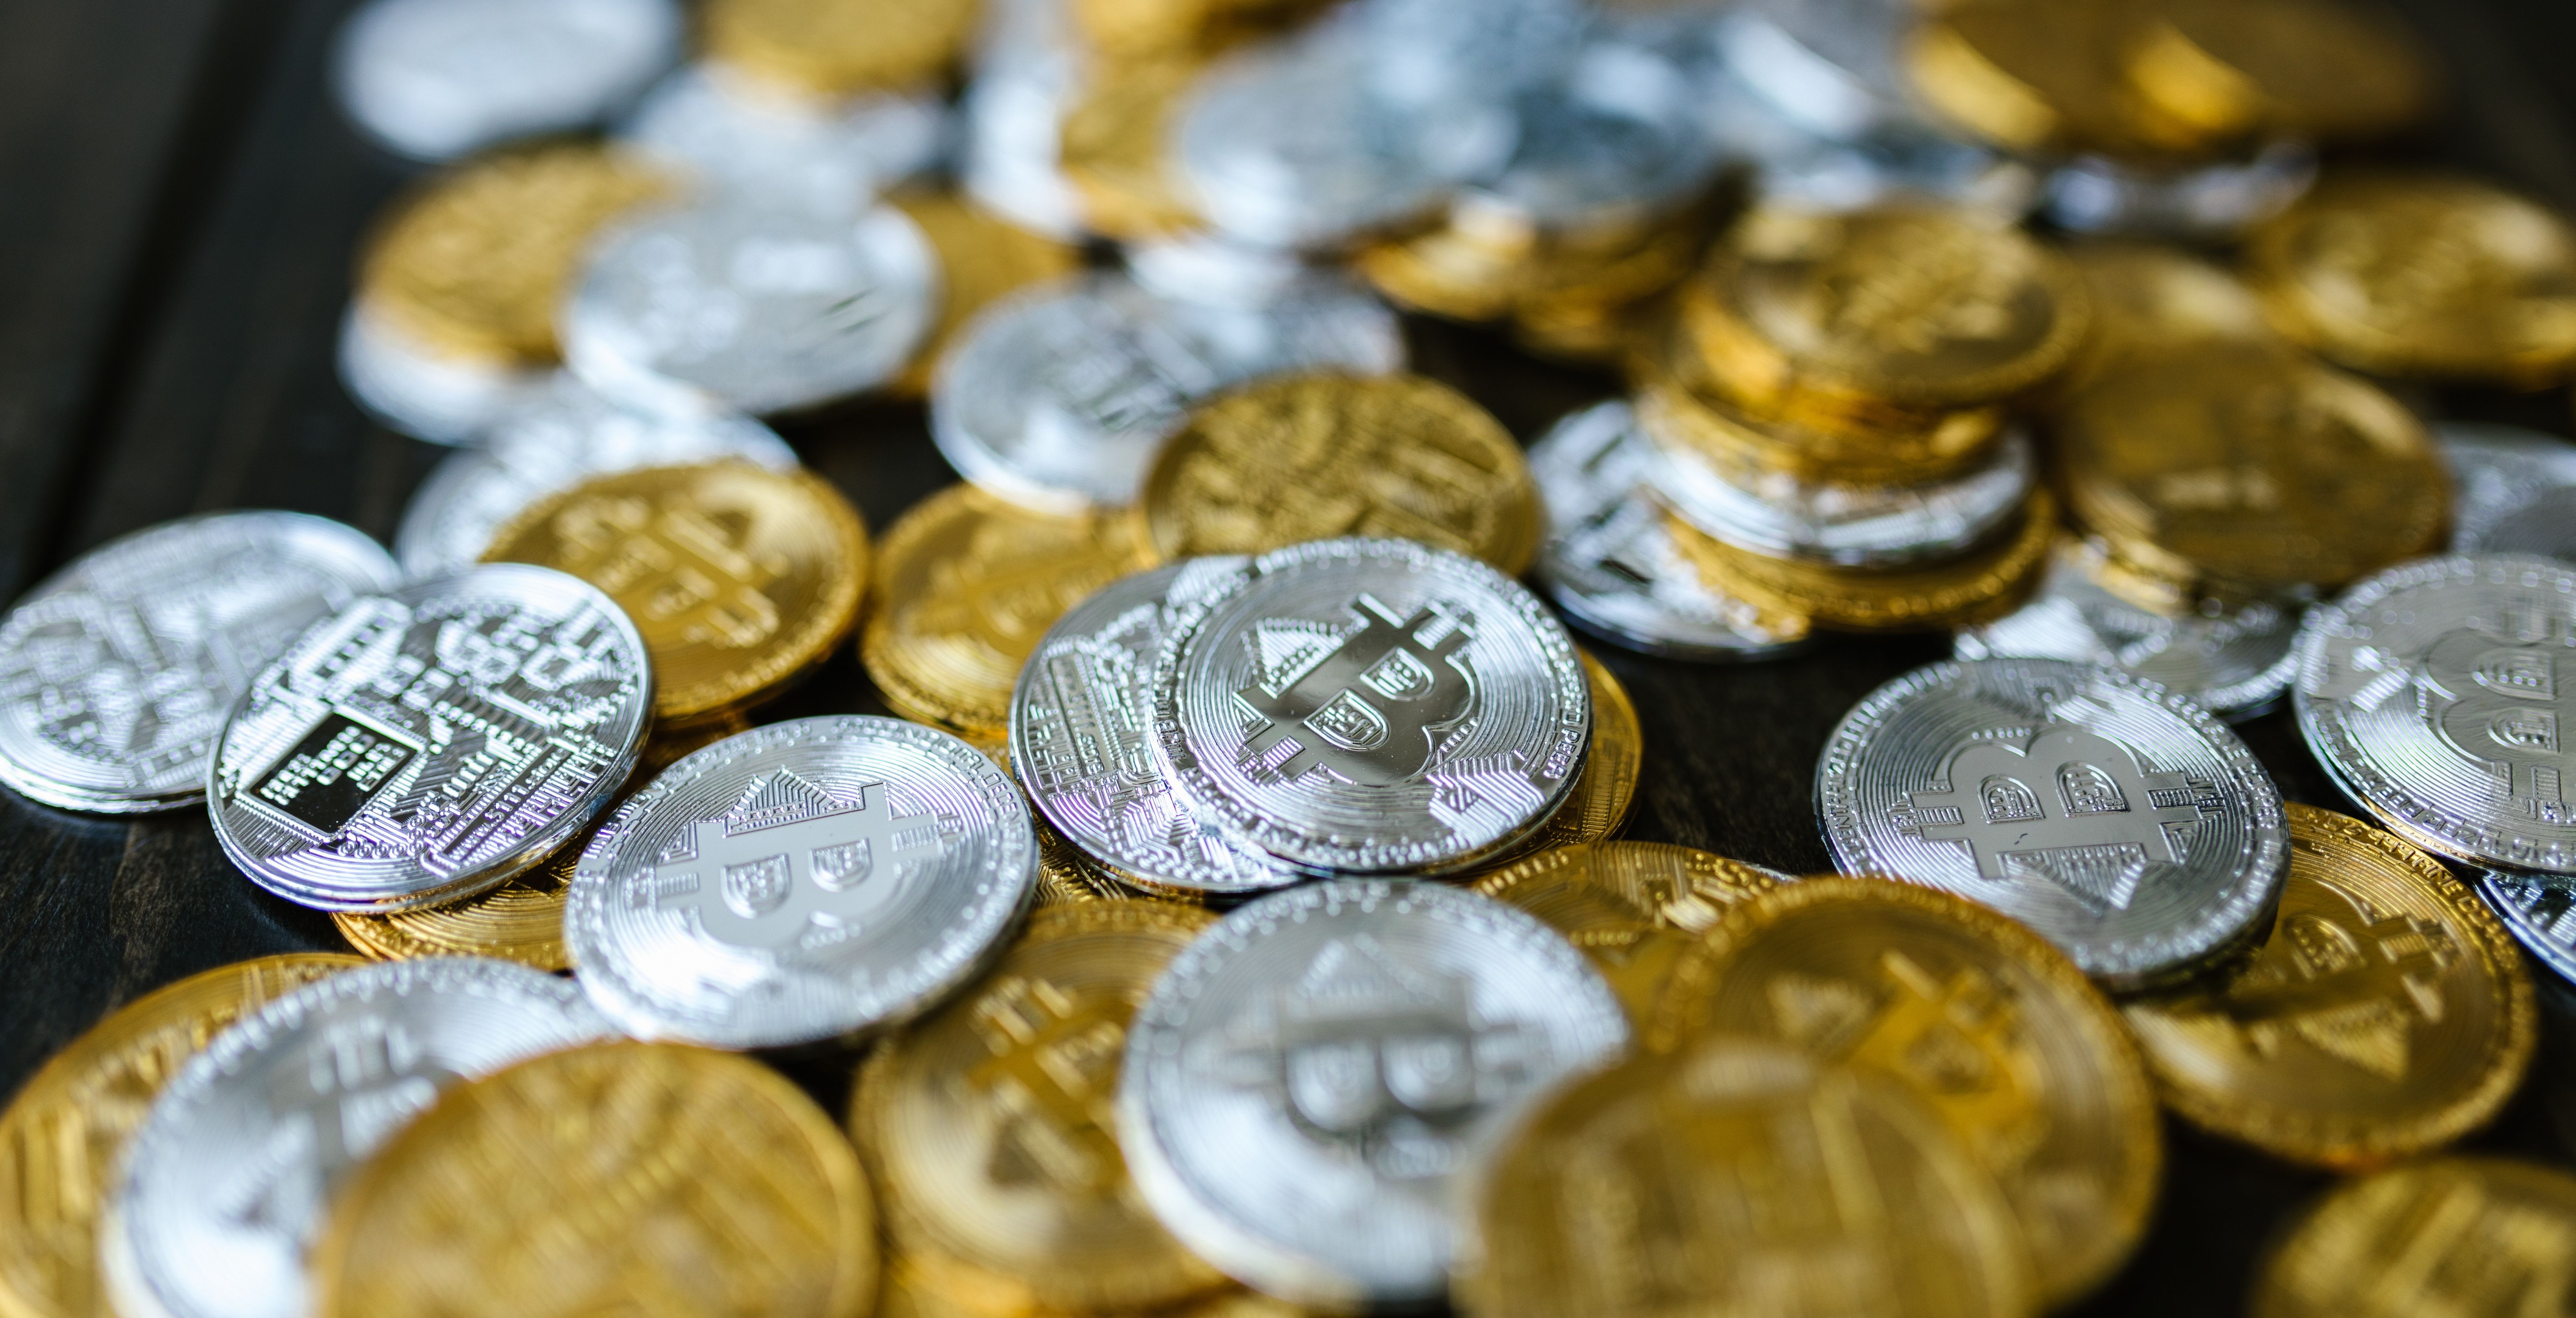 gold and silver bitcoins on table